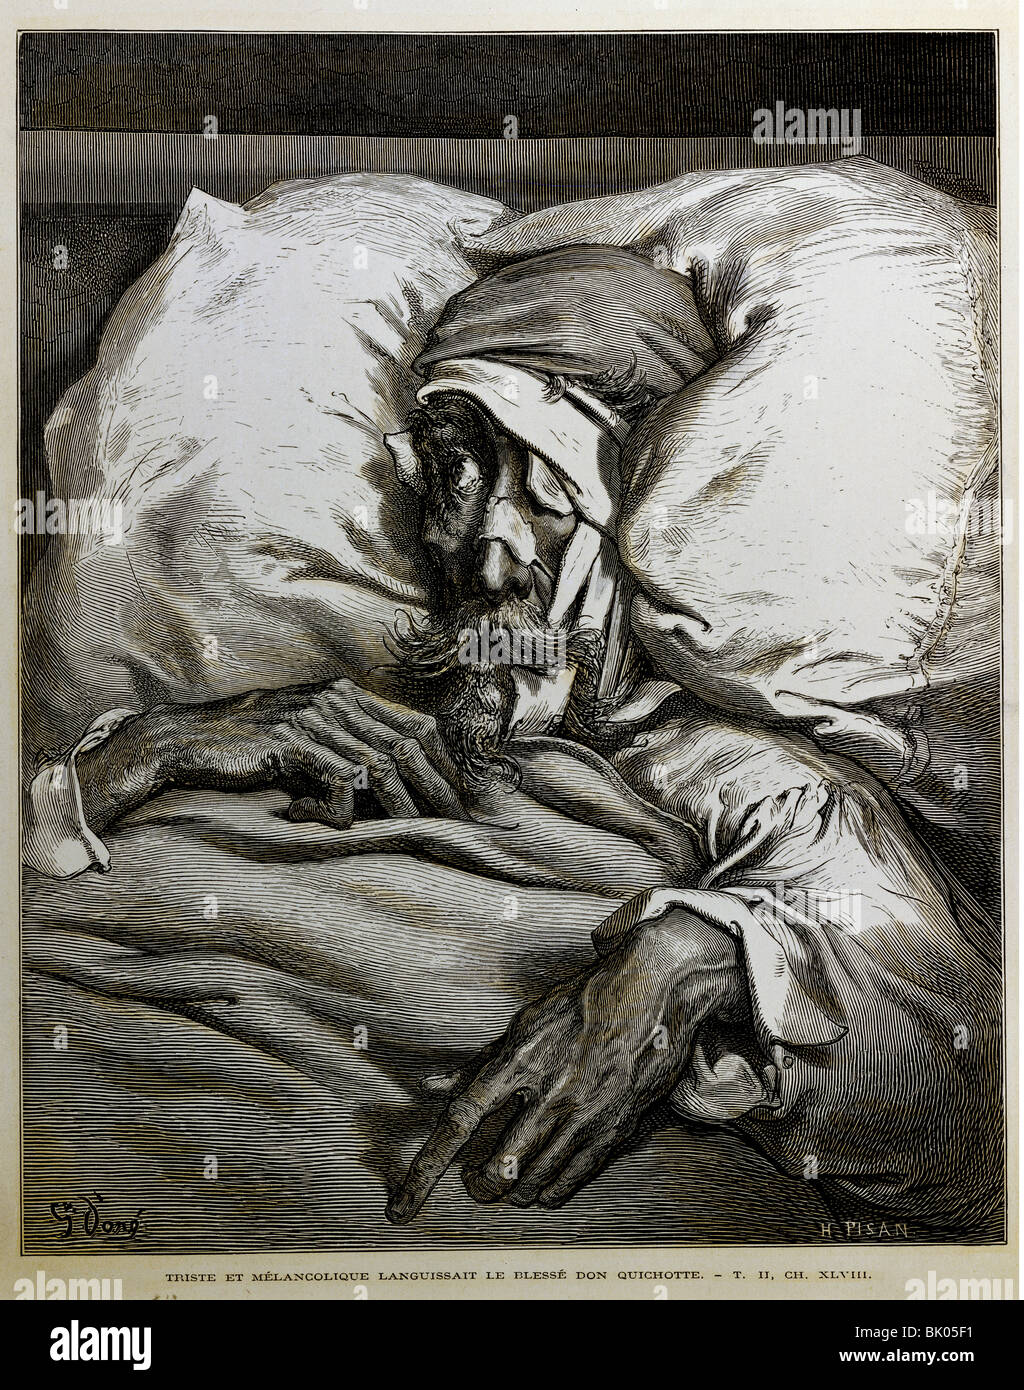 Cervantes y Saavedra, Miguel de, 1547 - 23.4.1616, Spanish author / writer, works, 'Don Quixote de la Mancha', 1605/1615, scene, 'Don Quixote lying exhausted in bed wounded by adventures', wood engraving by Gustave Dore, Paris, 1863, private  collection, , Artist's Copyright has not to be cleared Stock Photo